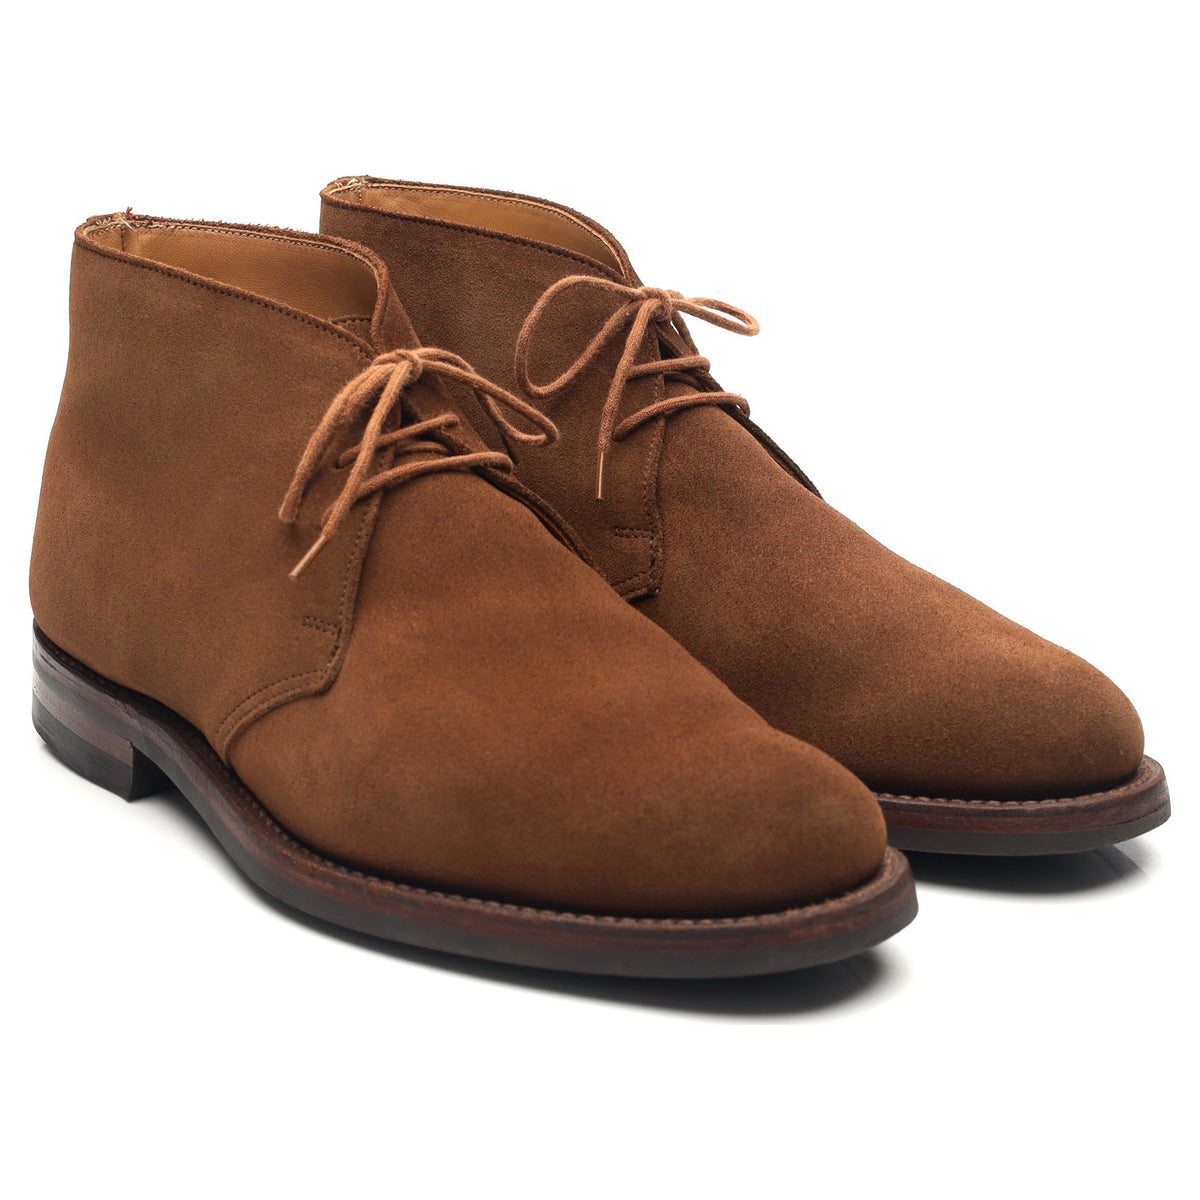 &#39;Chiltern&#39; Snuff Brown Suede Chukka Boots UK 7 E